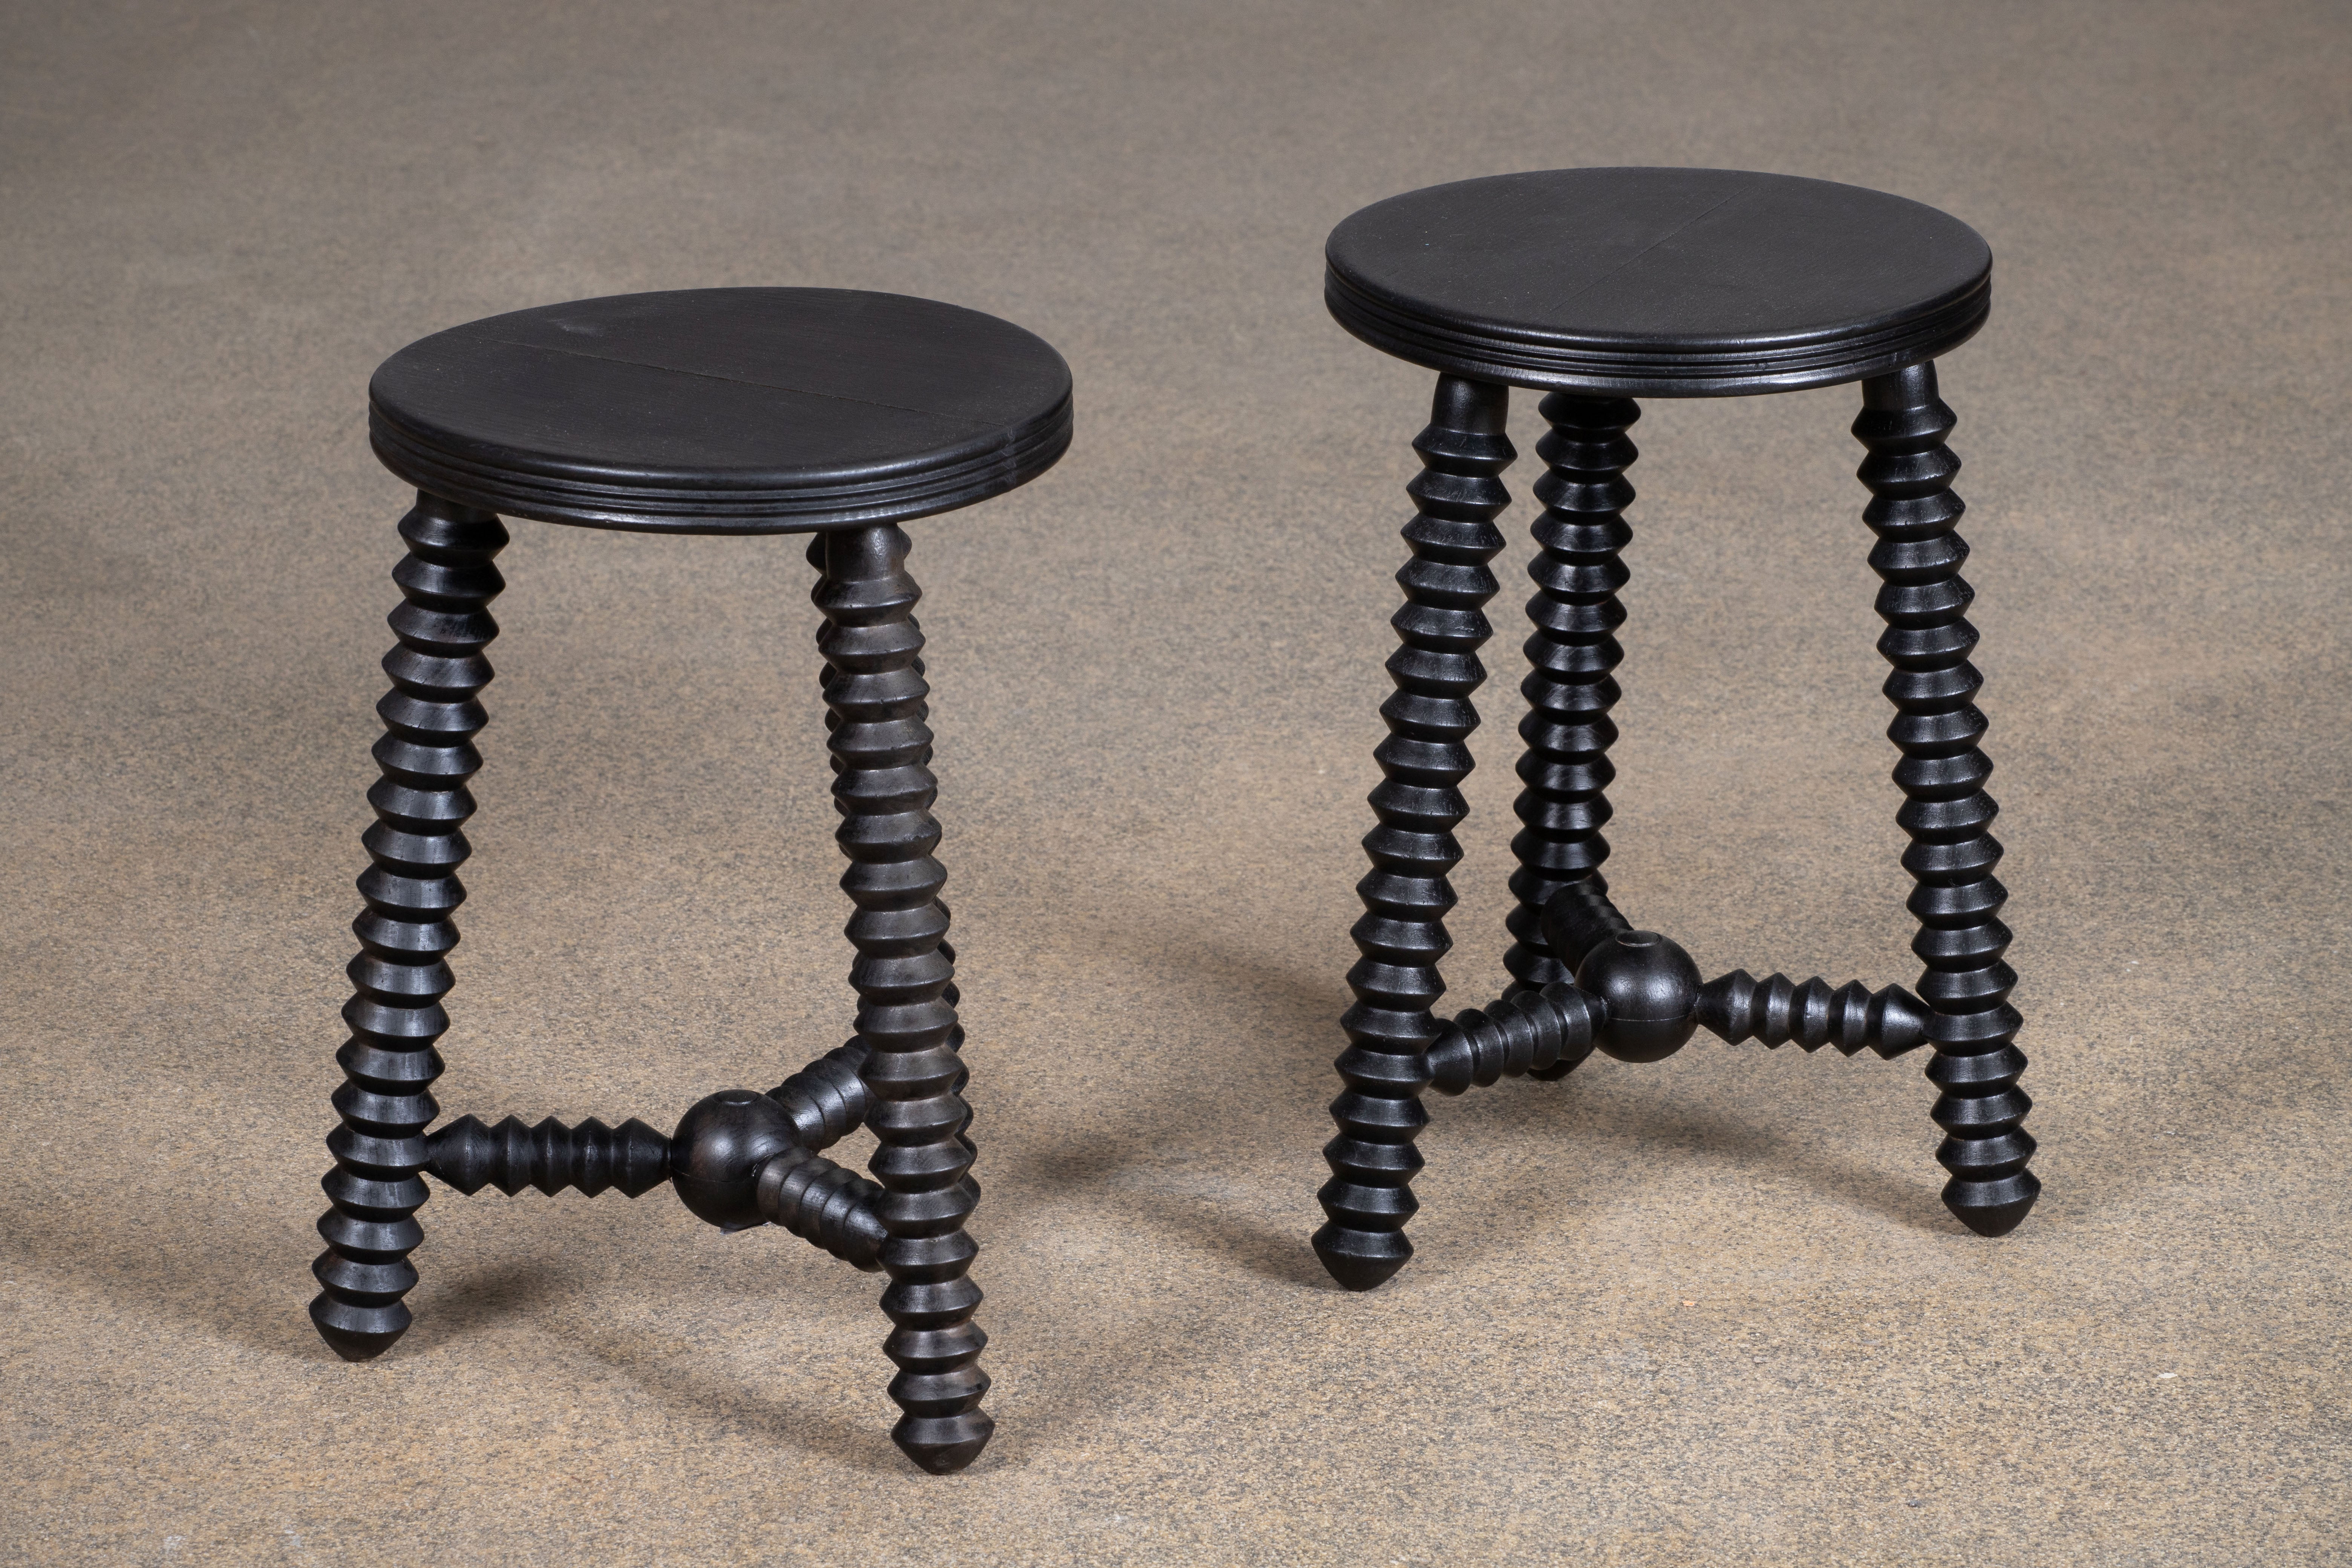 Beautiful carved stools or side tables attributed to Charles Dudouyt, made in France, 1940's. Ebonized wood finish with circular top and three leg base.
A major figure in early 20th-century French design, Charles Dudouyt moved France’s design